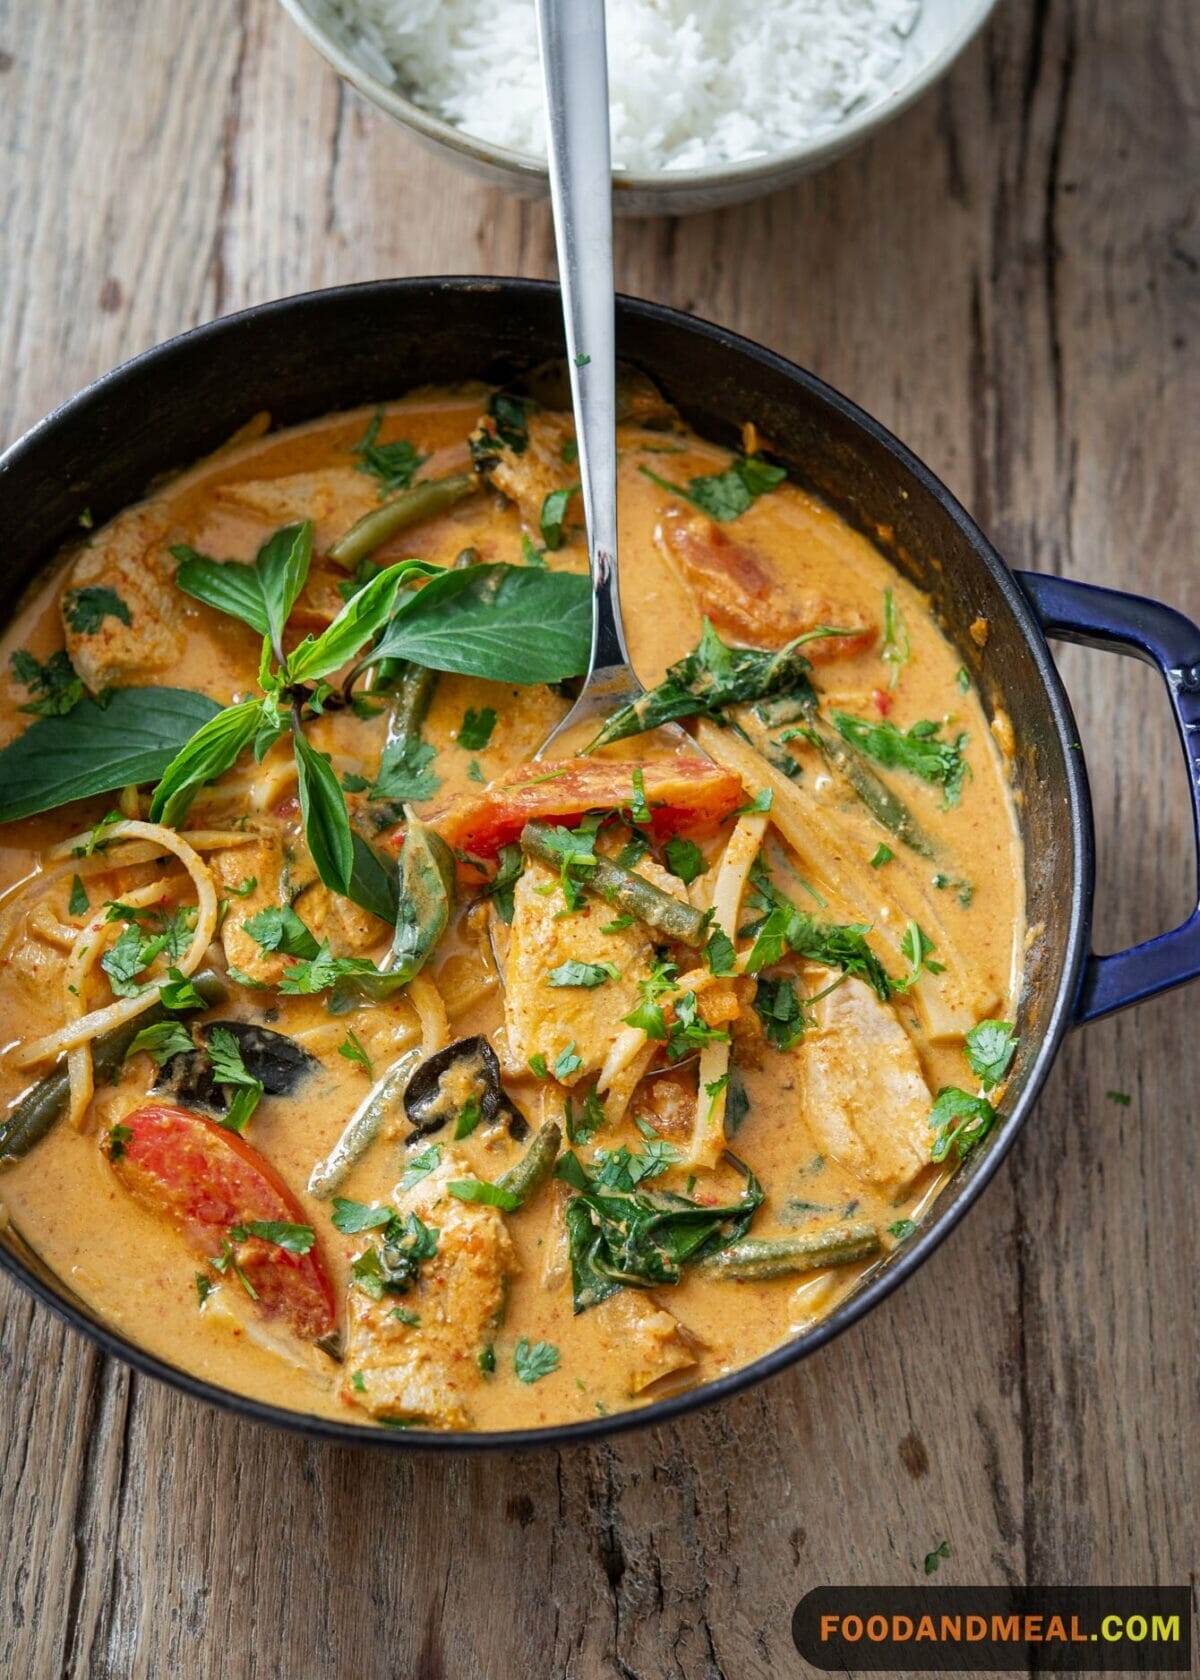 Thai Red Curry Chicken And Vegetable